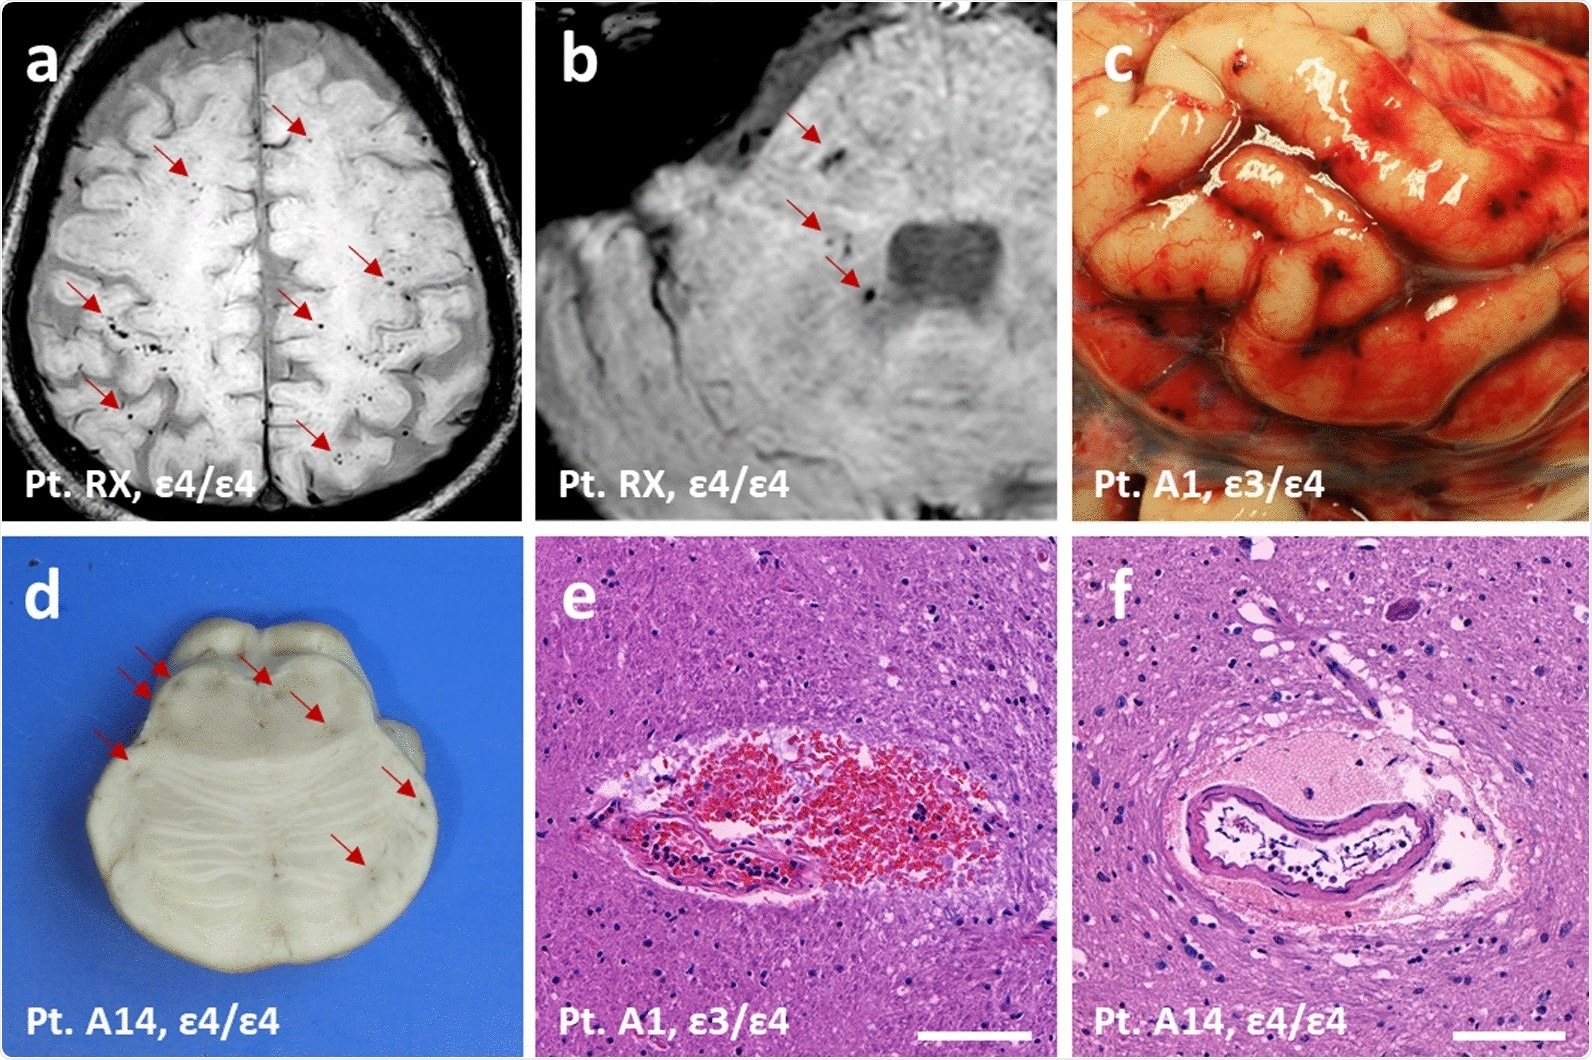 Microvascular brain haemorrhages in RECOVID and AUTOPSY cohorts. a MRI showing cortical microhaemorrhages in a case with APOE ε4/ε4. b MRI showing cerebellopontine microhaemorrhages in the same case as (a). c Brain subarachnoidal microhaemorrhages at autopsy in a case with APOE ε3/ε4. d Brain pontine microhaemorrhages at neuropathological examination in a case with APOE ε4/ε4. e Histological H&E section showing pontine microhaemorrhages in the same case as (c). f Histological H&E section showing pontine microhaemorrhages in the same case as (d). Red arrows indicate microhaemorrhages. Scale bars represent 100 μm in (e) and (f)